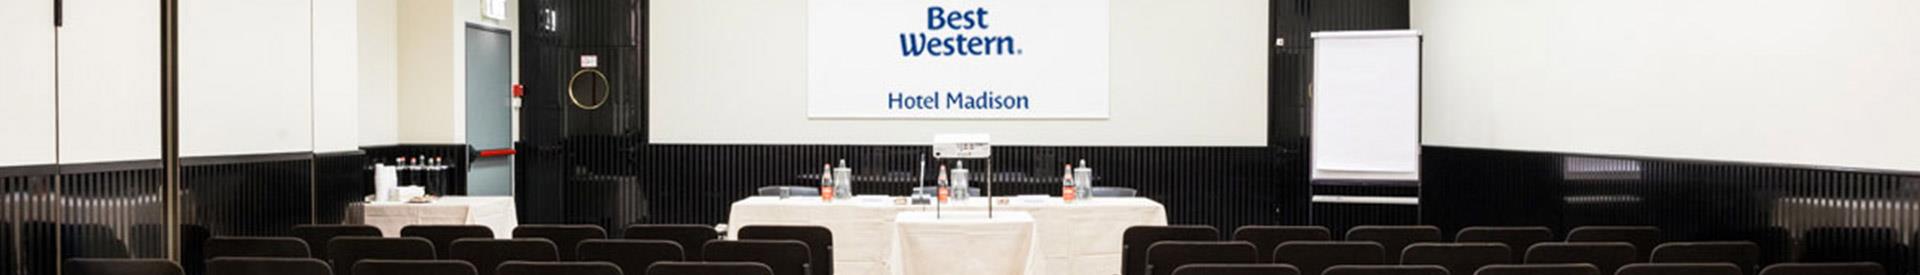  Looking for a hotel for your stay in Milano (MI)? Book/reserve at the Best Western Hotel Madison